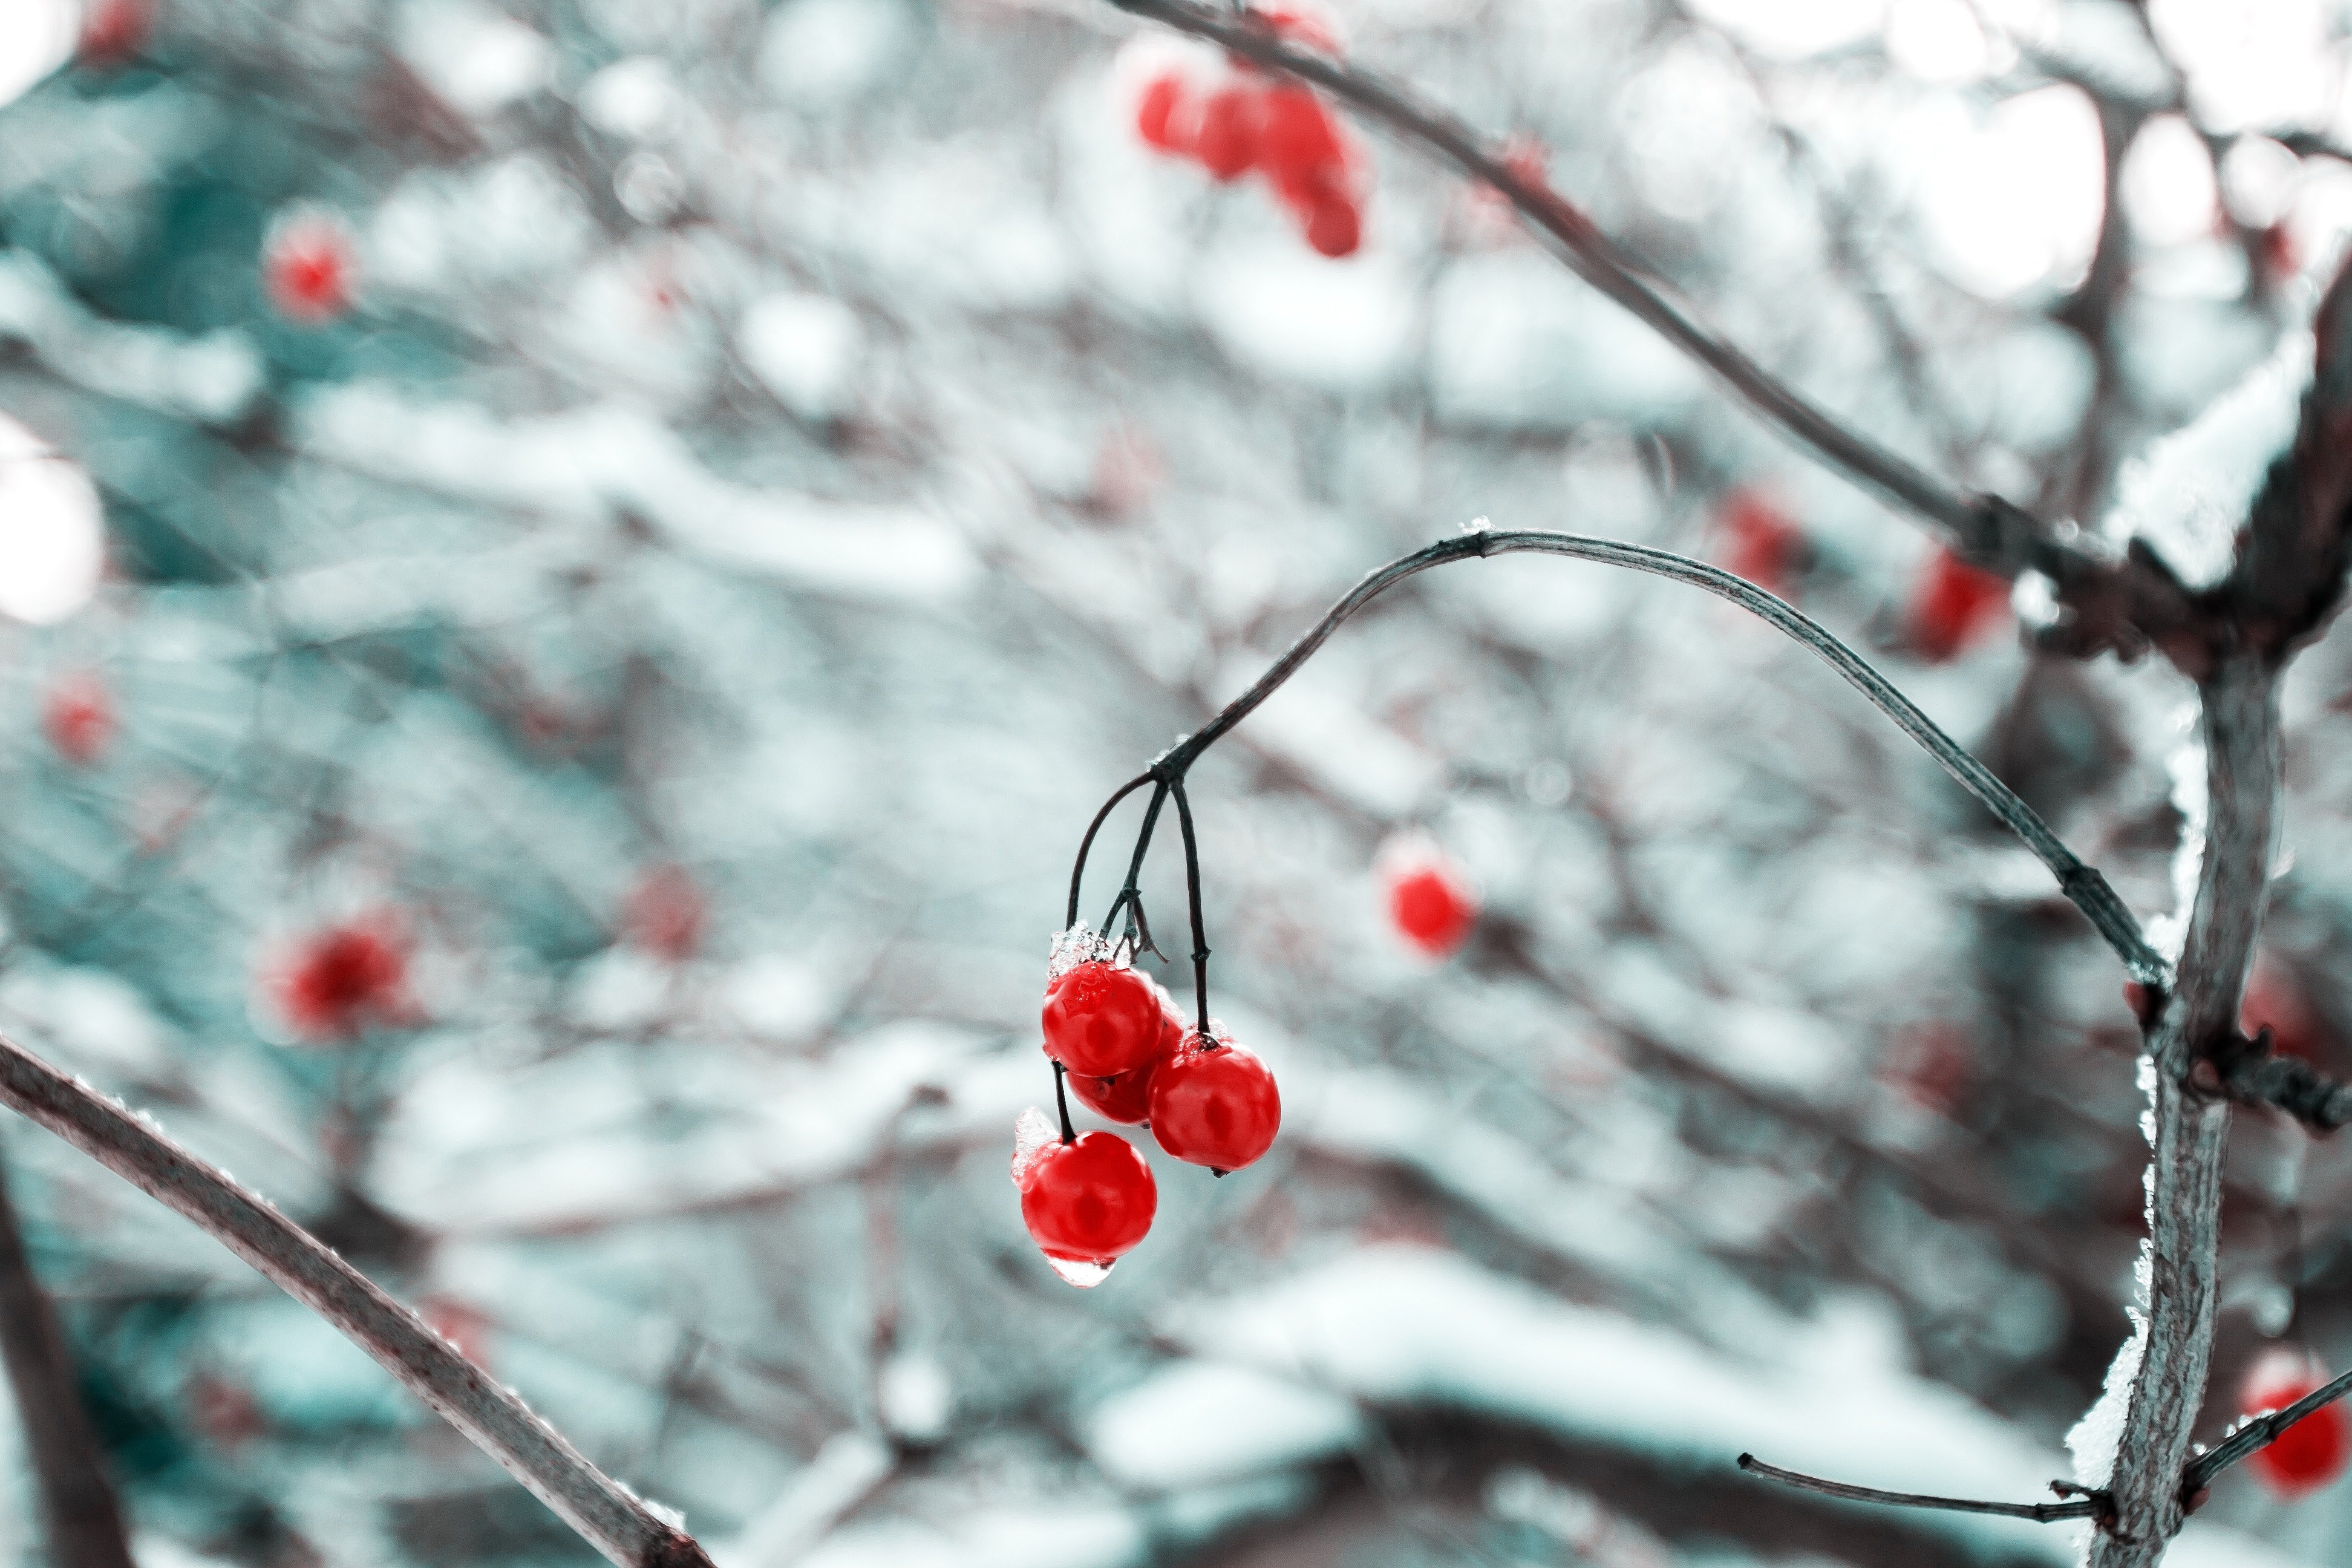 3888x2592 #nature, #fruit, #forest, #ice, #bokeh, #cranberry, #closeup, #outdoors, #woodland, #snow, #garden, #environment, #snowstorm, #close up, #holiday, #winter, #tree, #branch, #PNG image, #berry, #cold HD Wallpaper